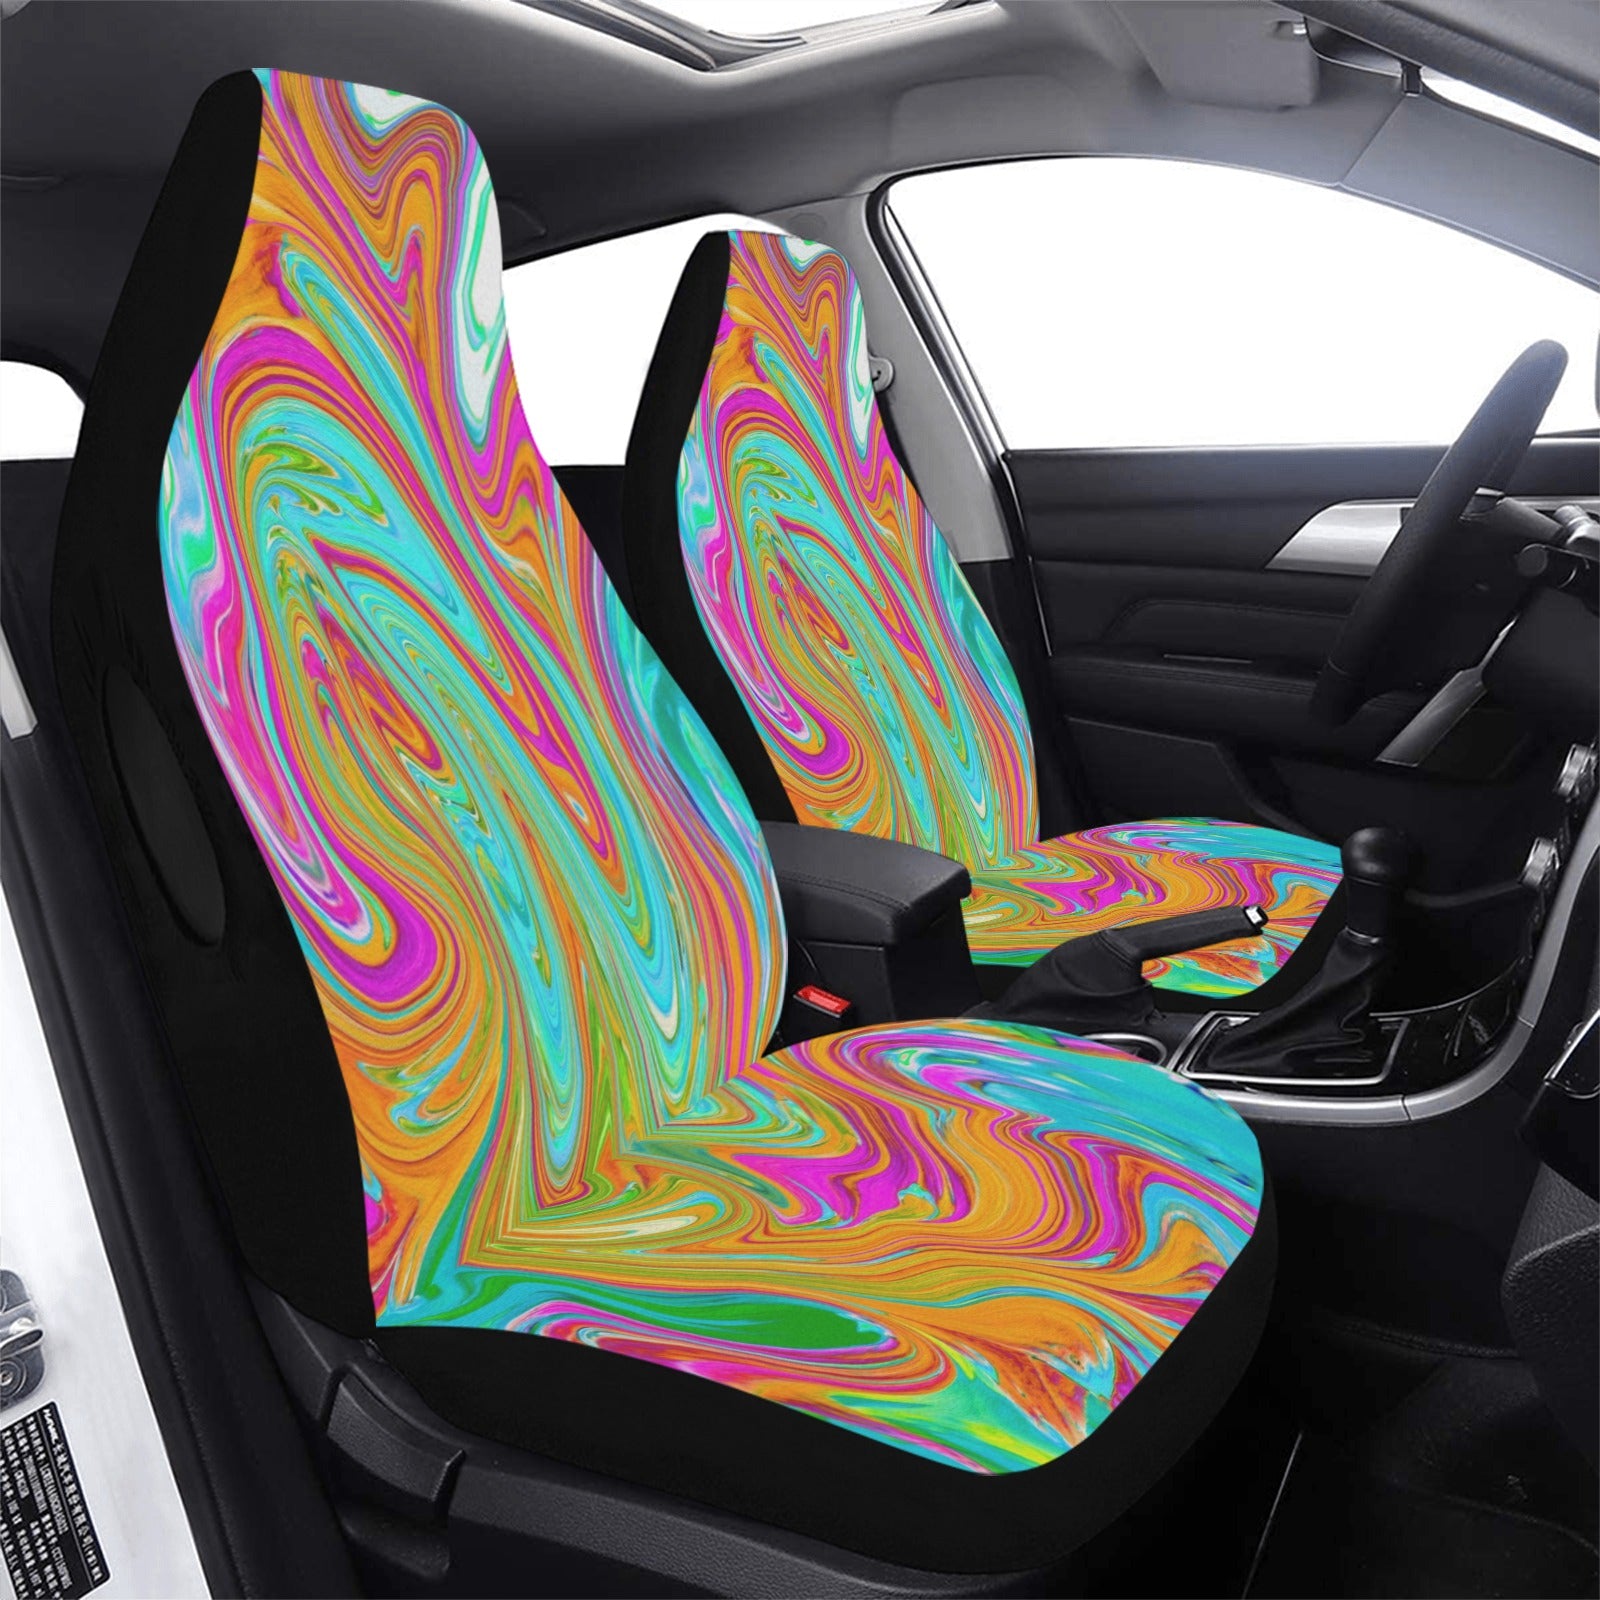 Car Seat Covers, Blue, Orange and Hot Pink Groovy Abstract Retro Art